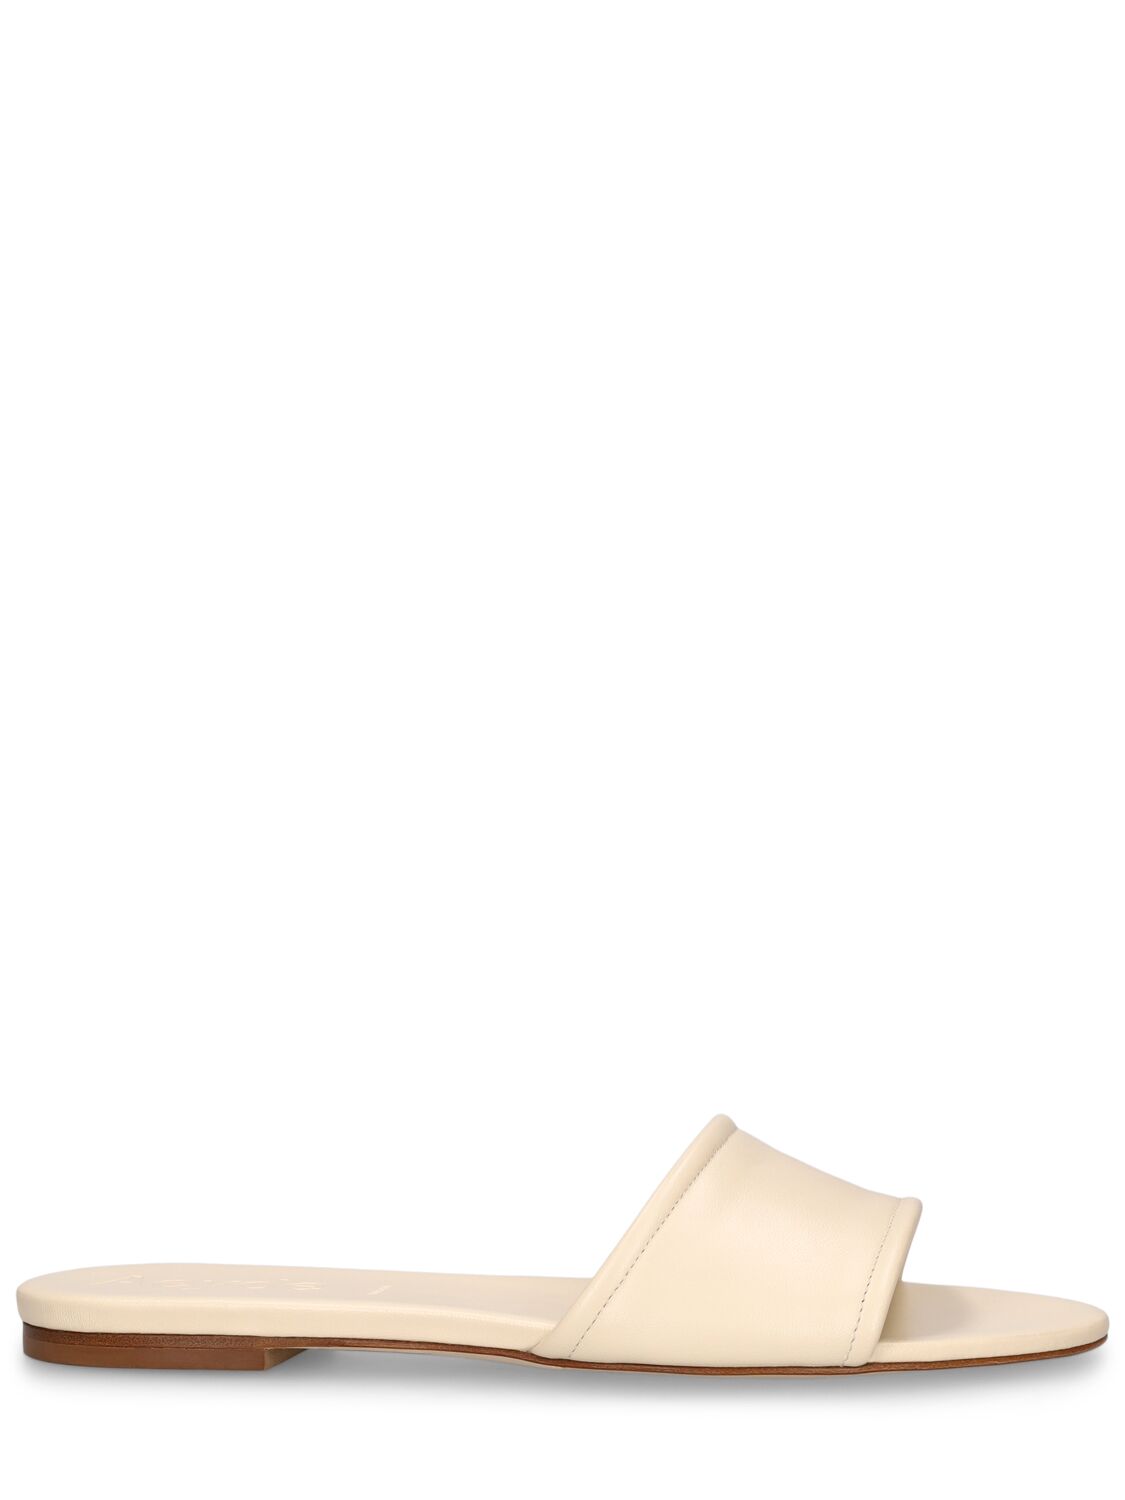 Aeyde Anna Leather Sandals In Cream